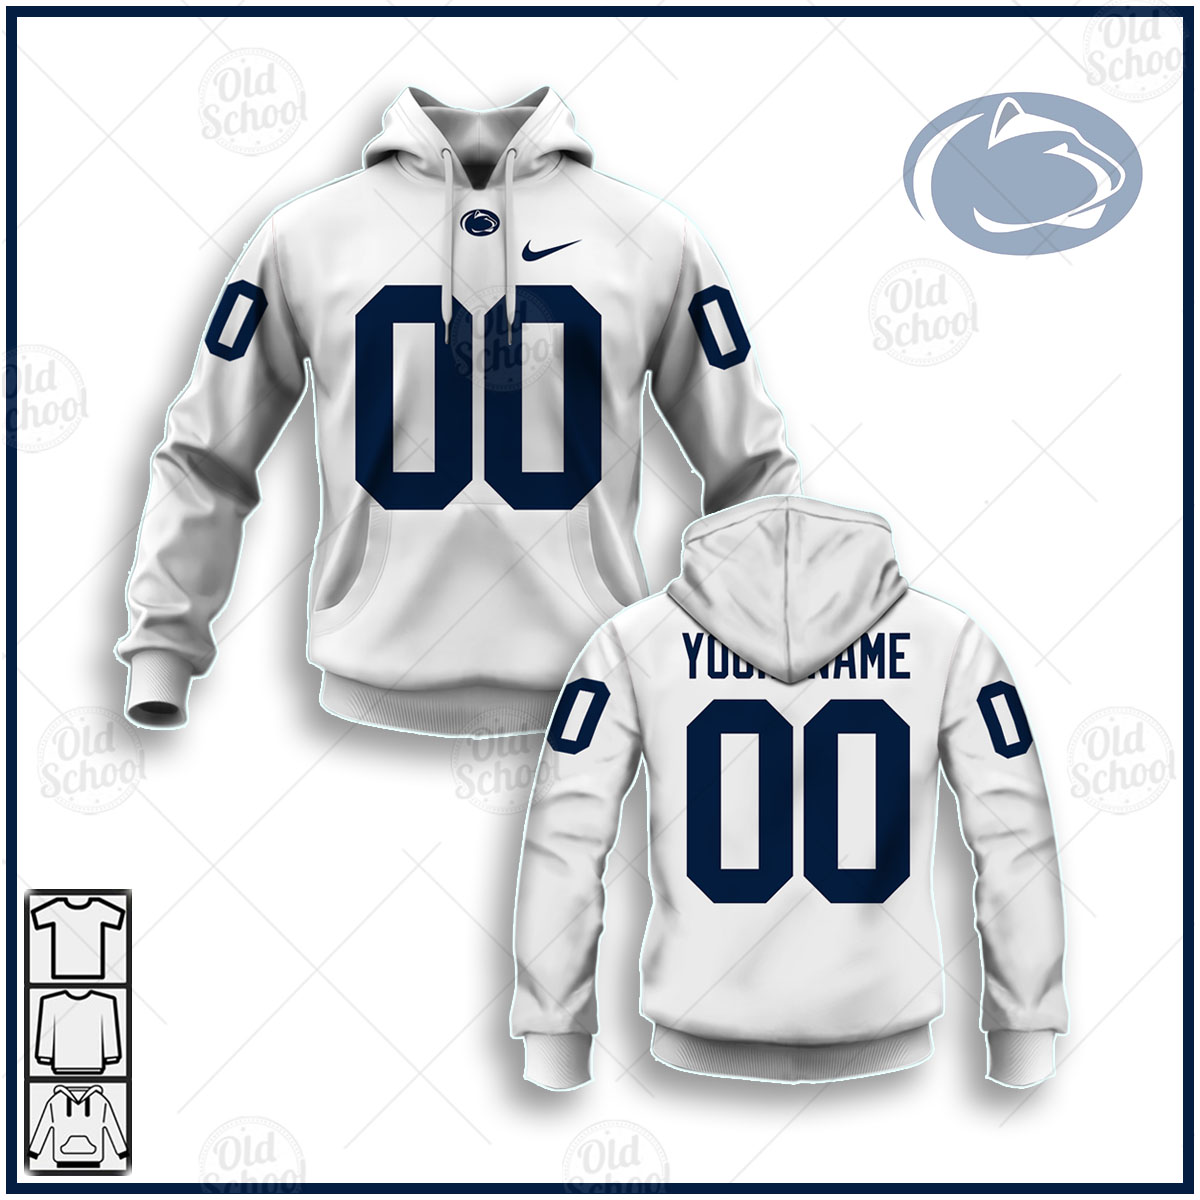 Personalized Penn State Nittany Lions NCAA Football FBS Jersey - White